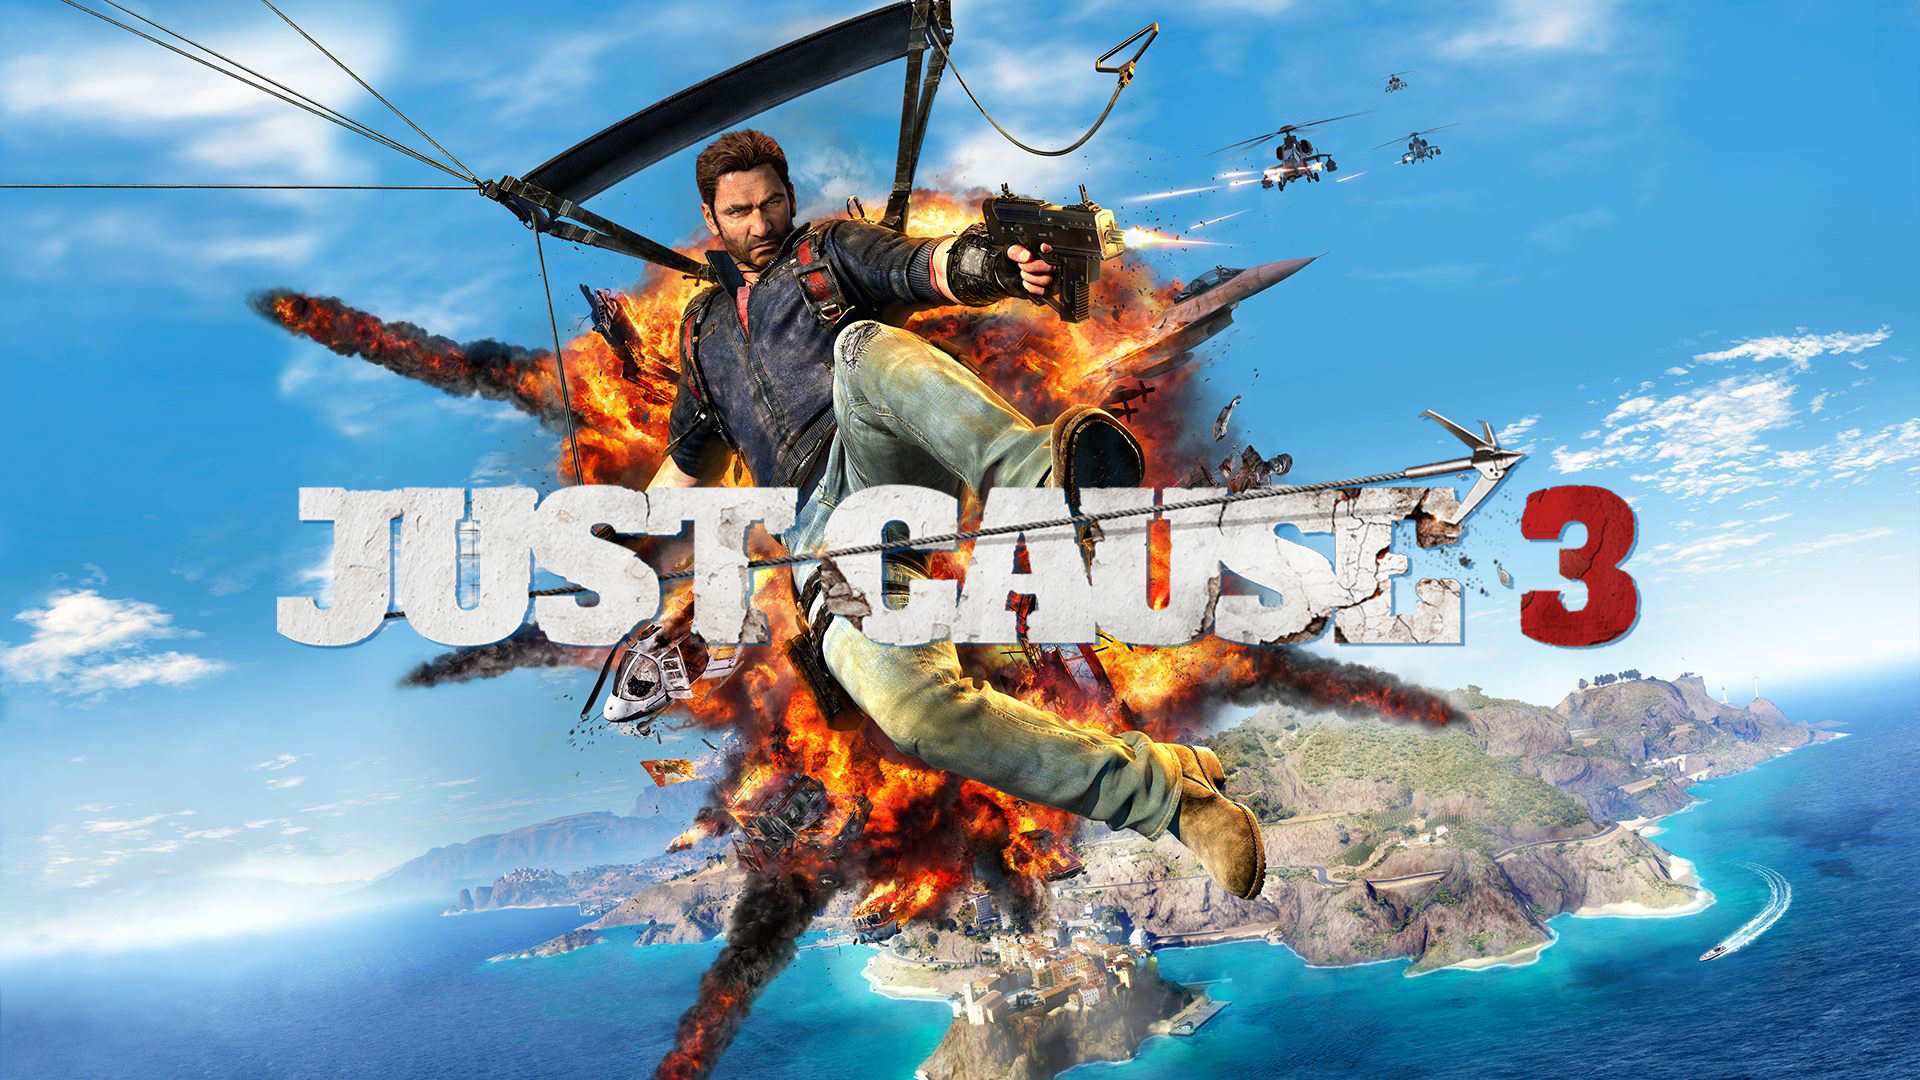 just cause 3 pc free